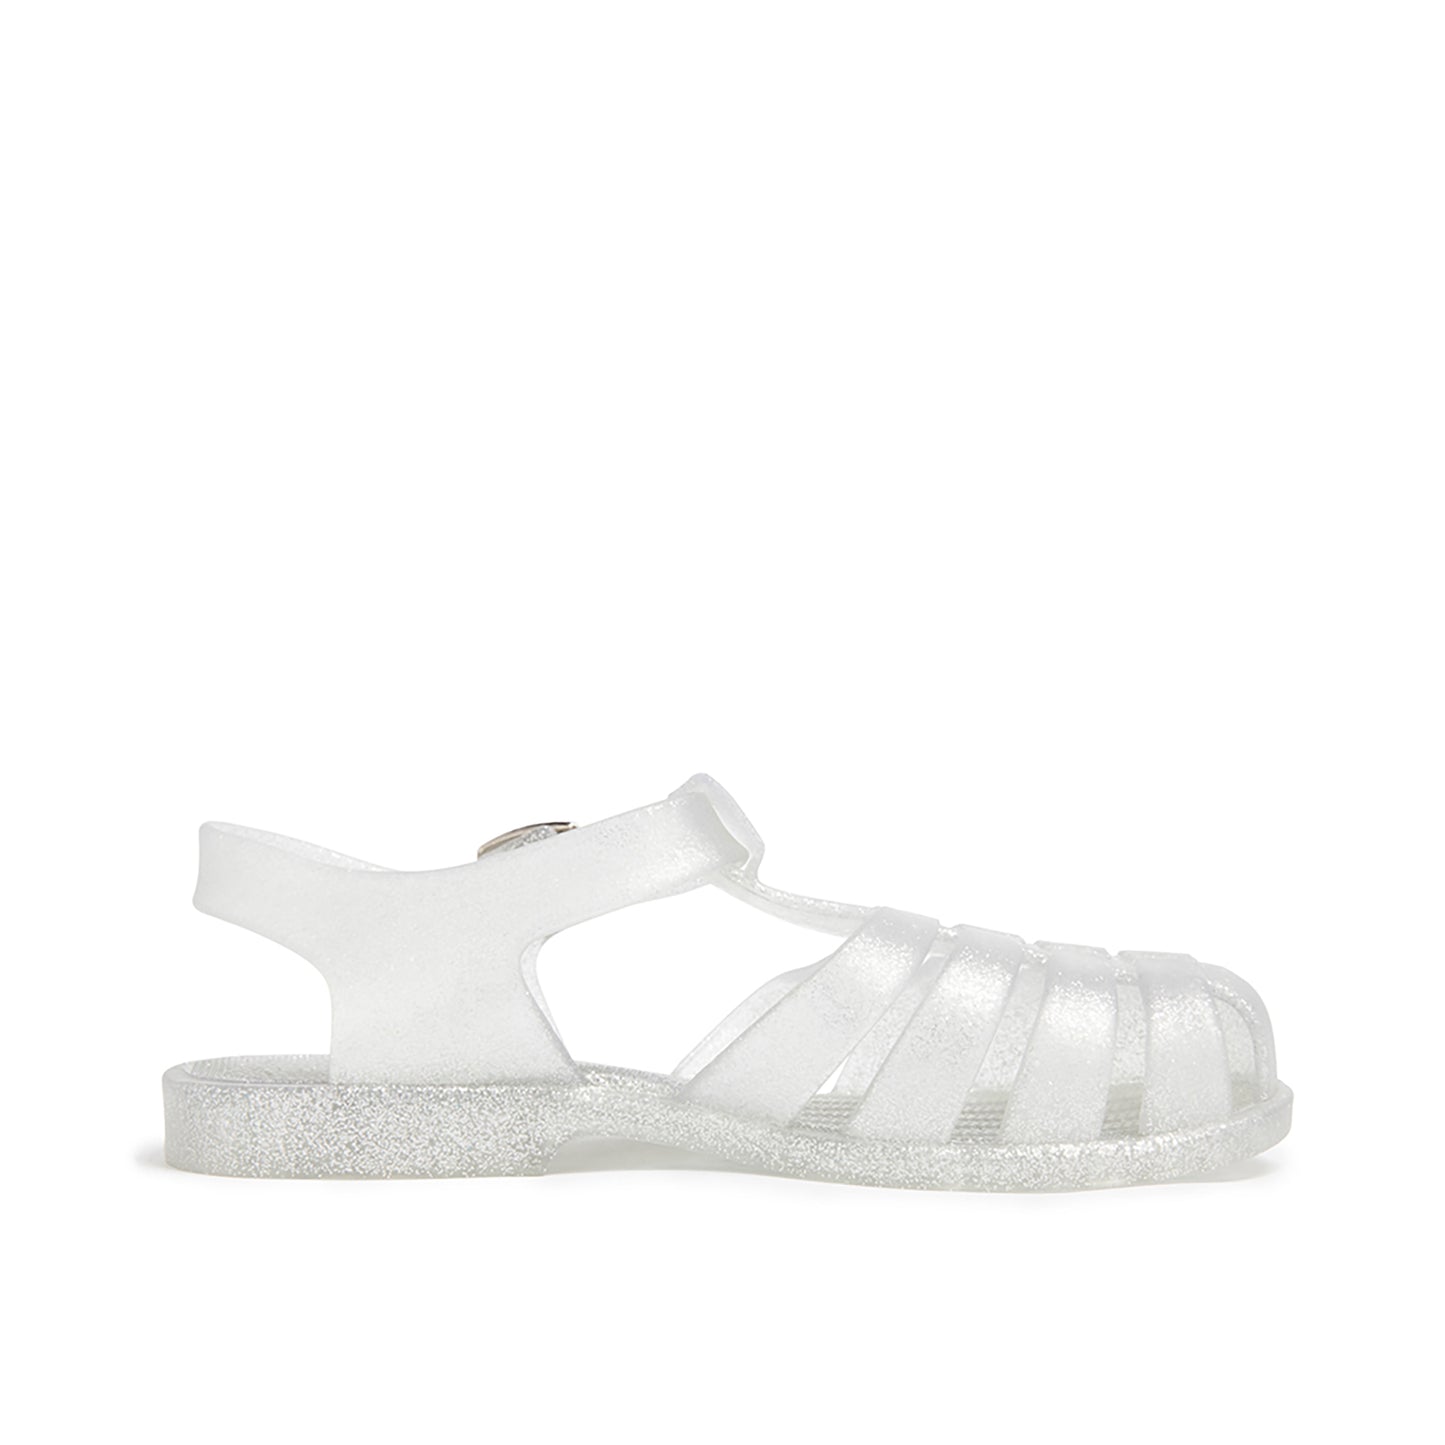 IT'S A SIGN Jelly Sandals - Shop Online | shooshoos.co.za